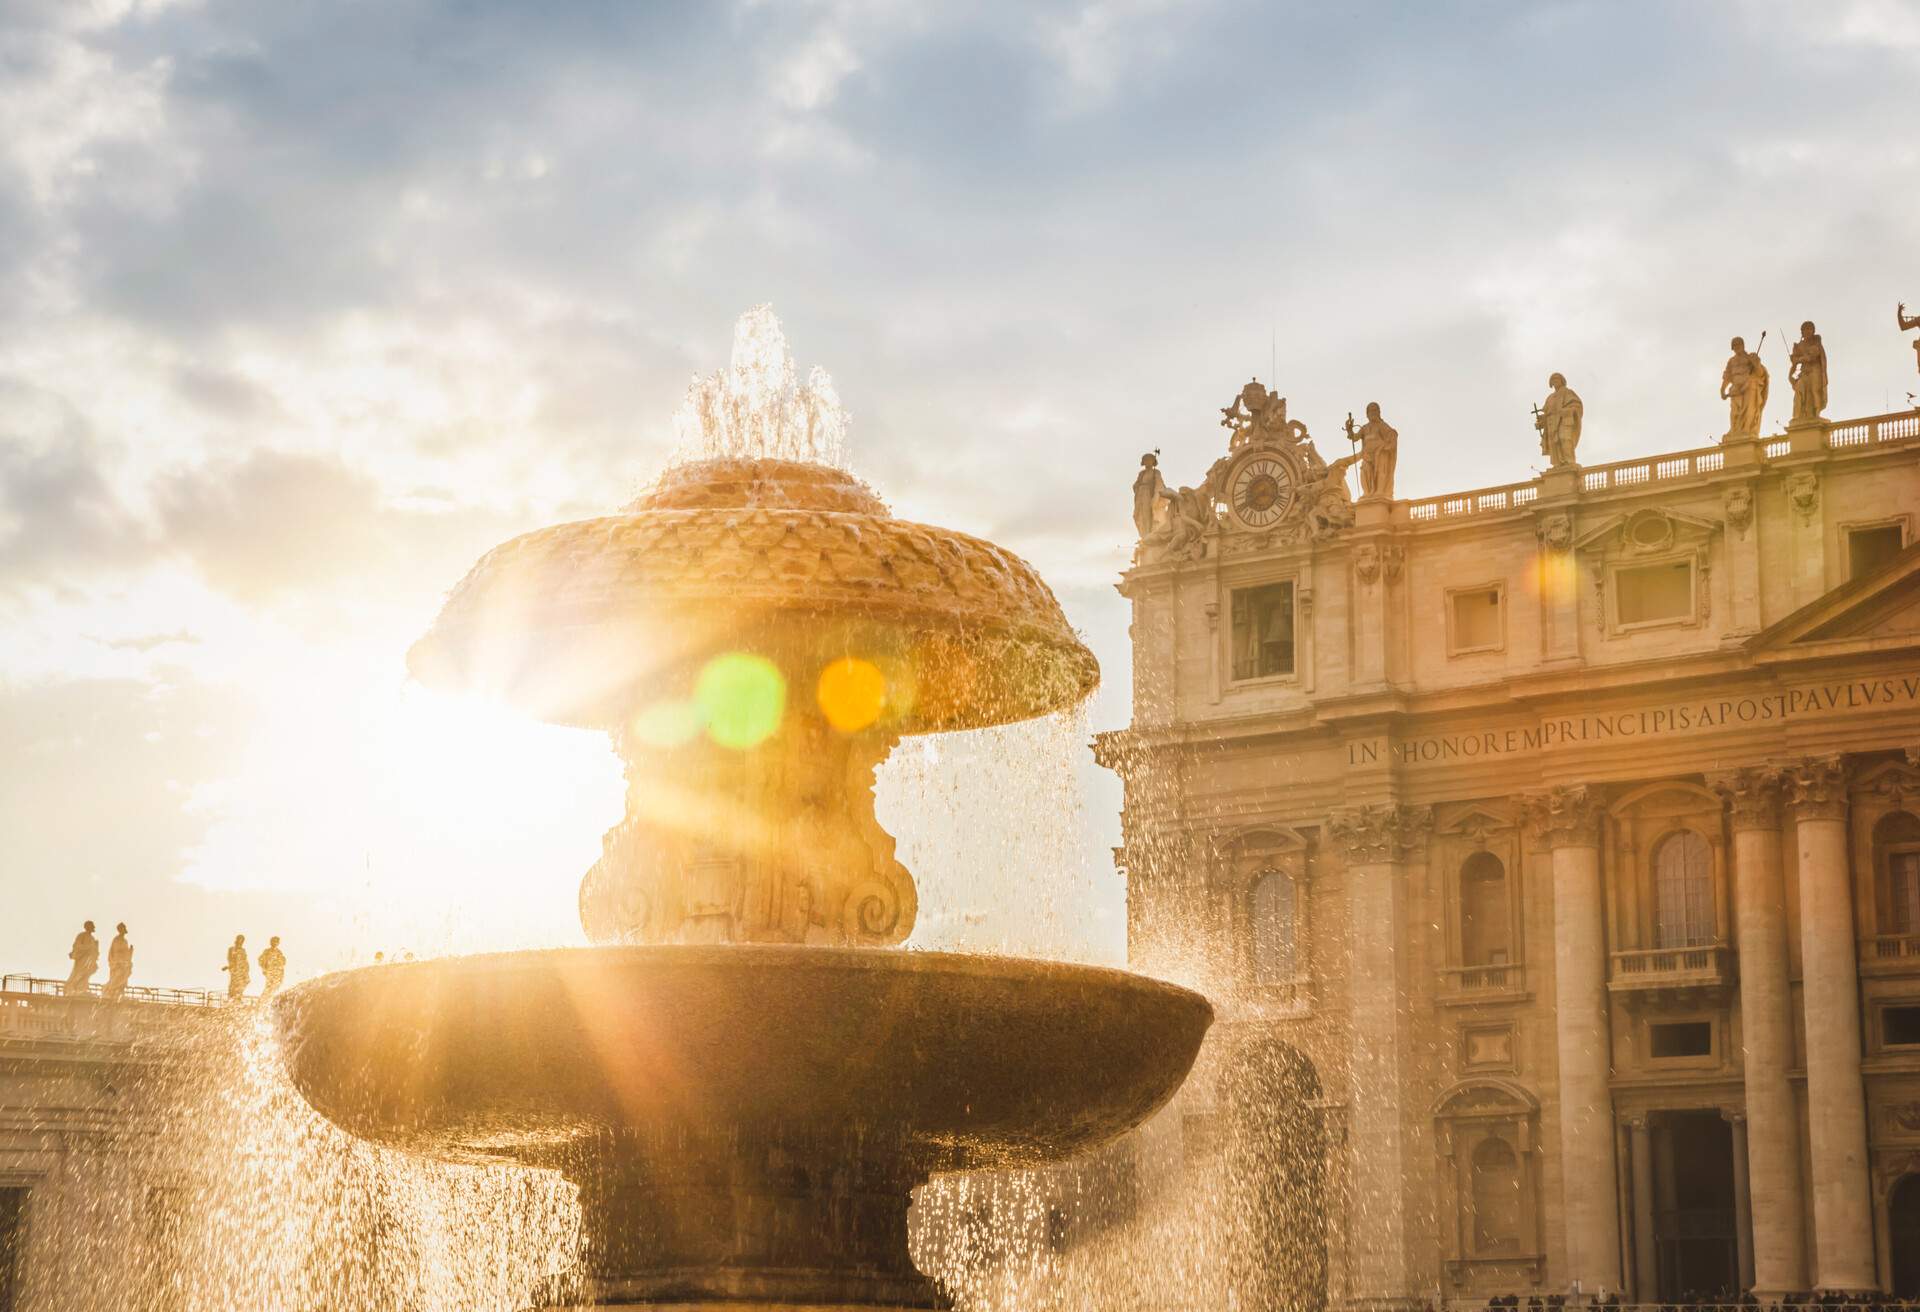 Fountain in St. Peter's square, Vatican City, Europe.